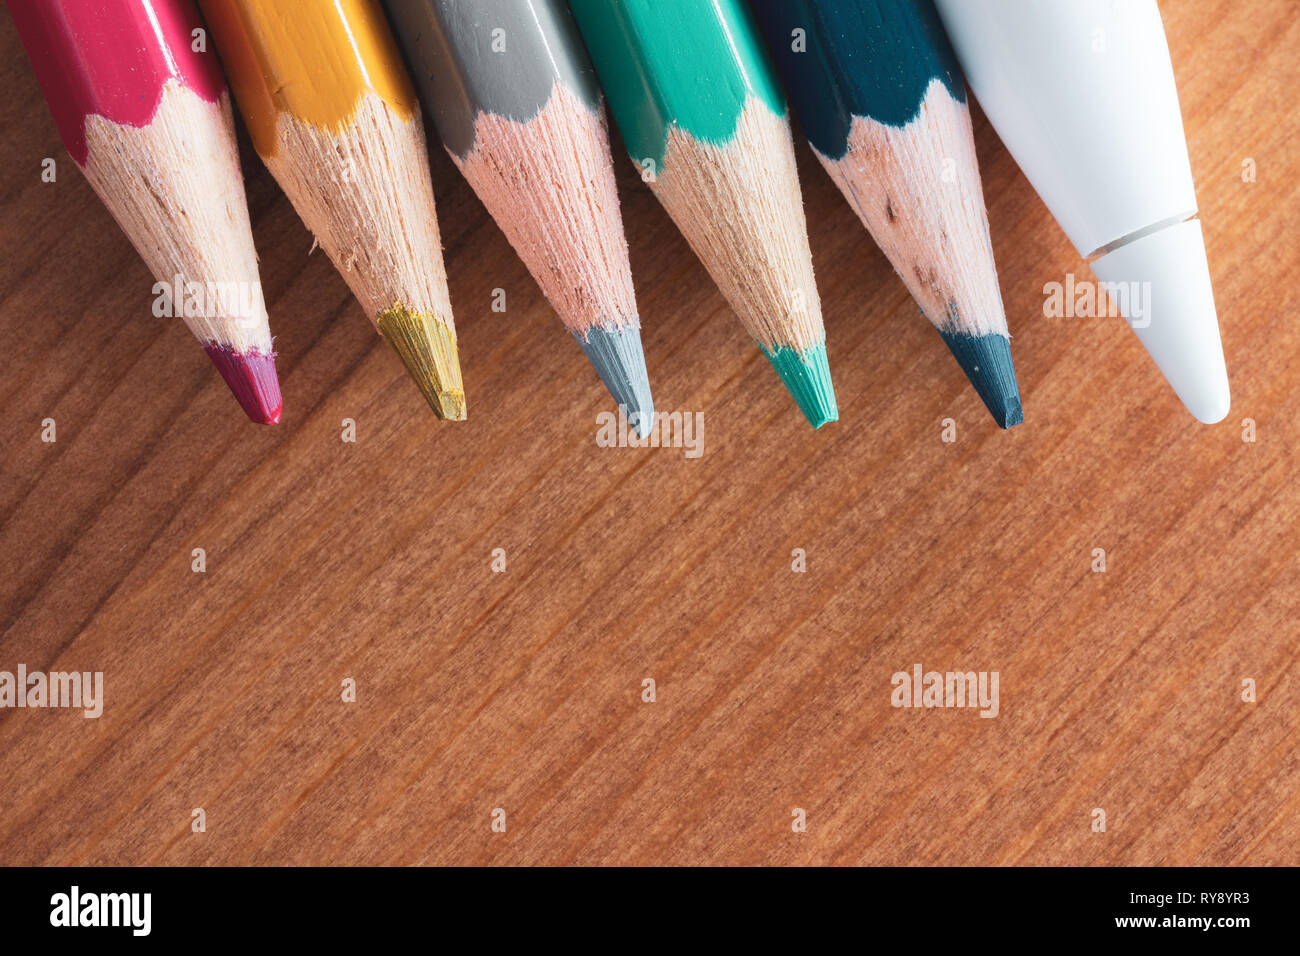 https://c8.alamy.com/comp/RY8YR3/apple-pencil-2015-1st-generation-for-ipad-pro-and-traditional-coloured-pencils-on-wooden-table-RY8YR3.jpg